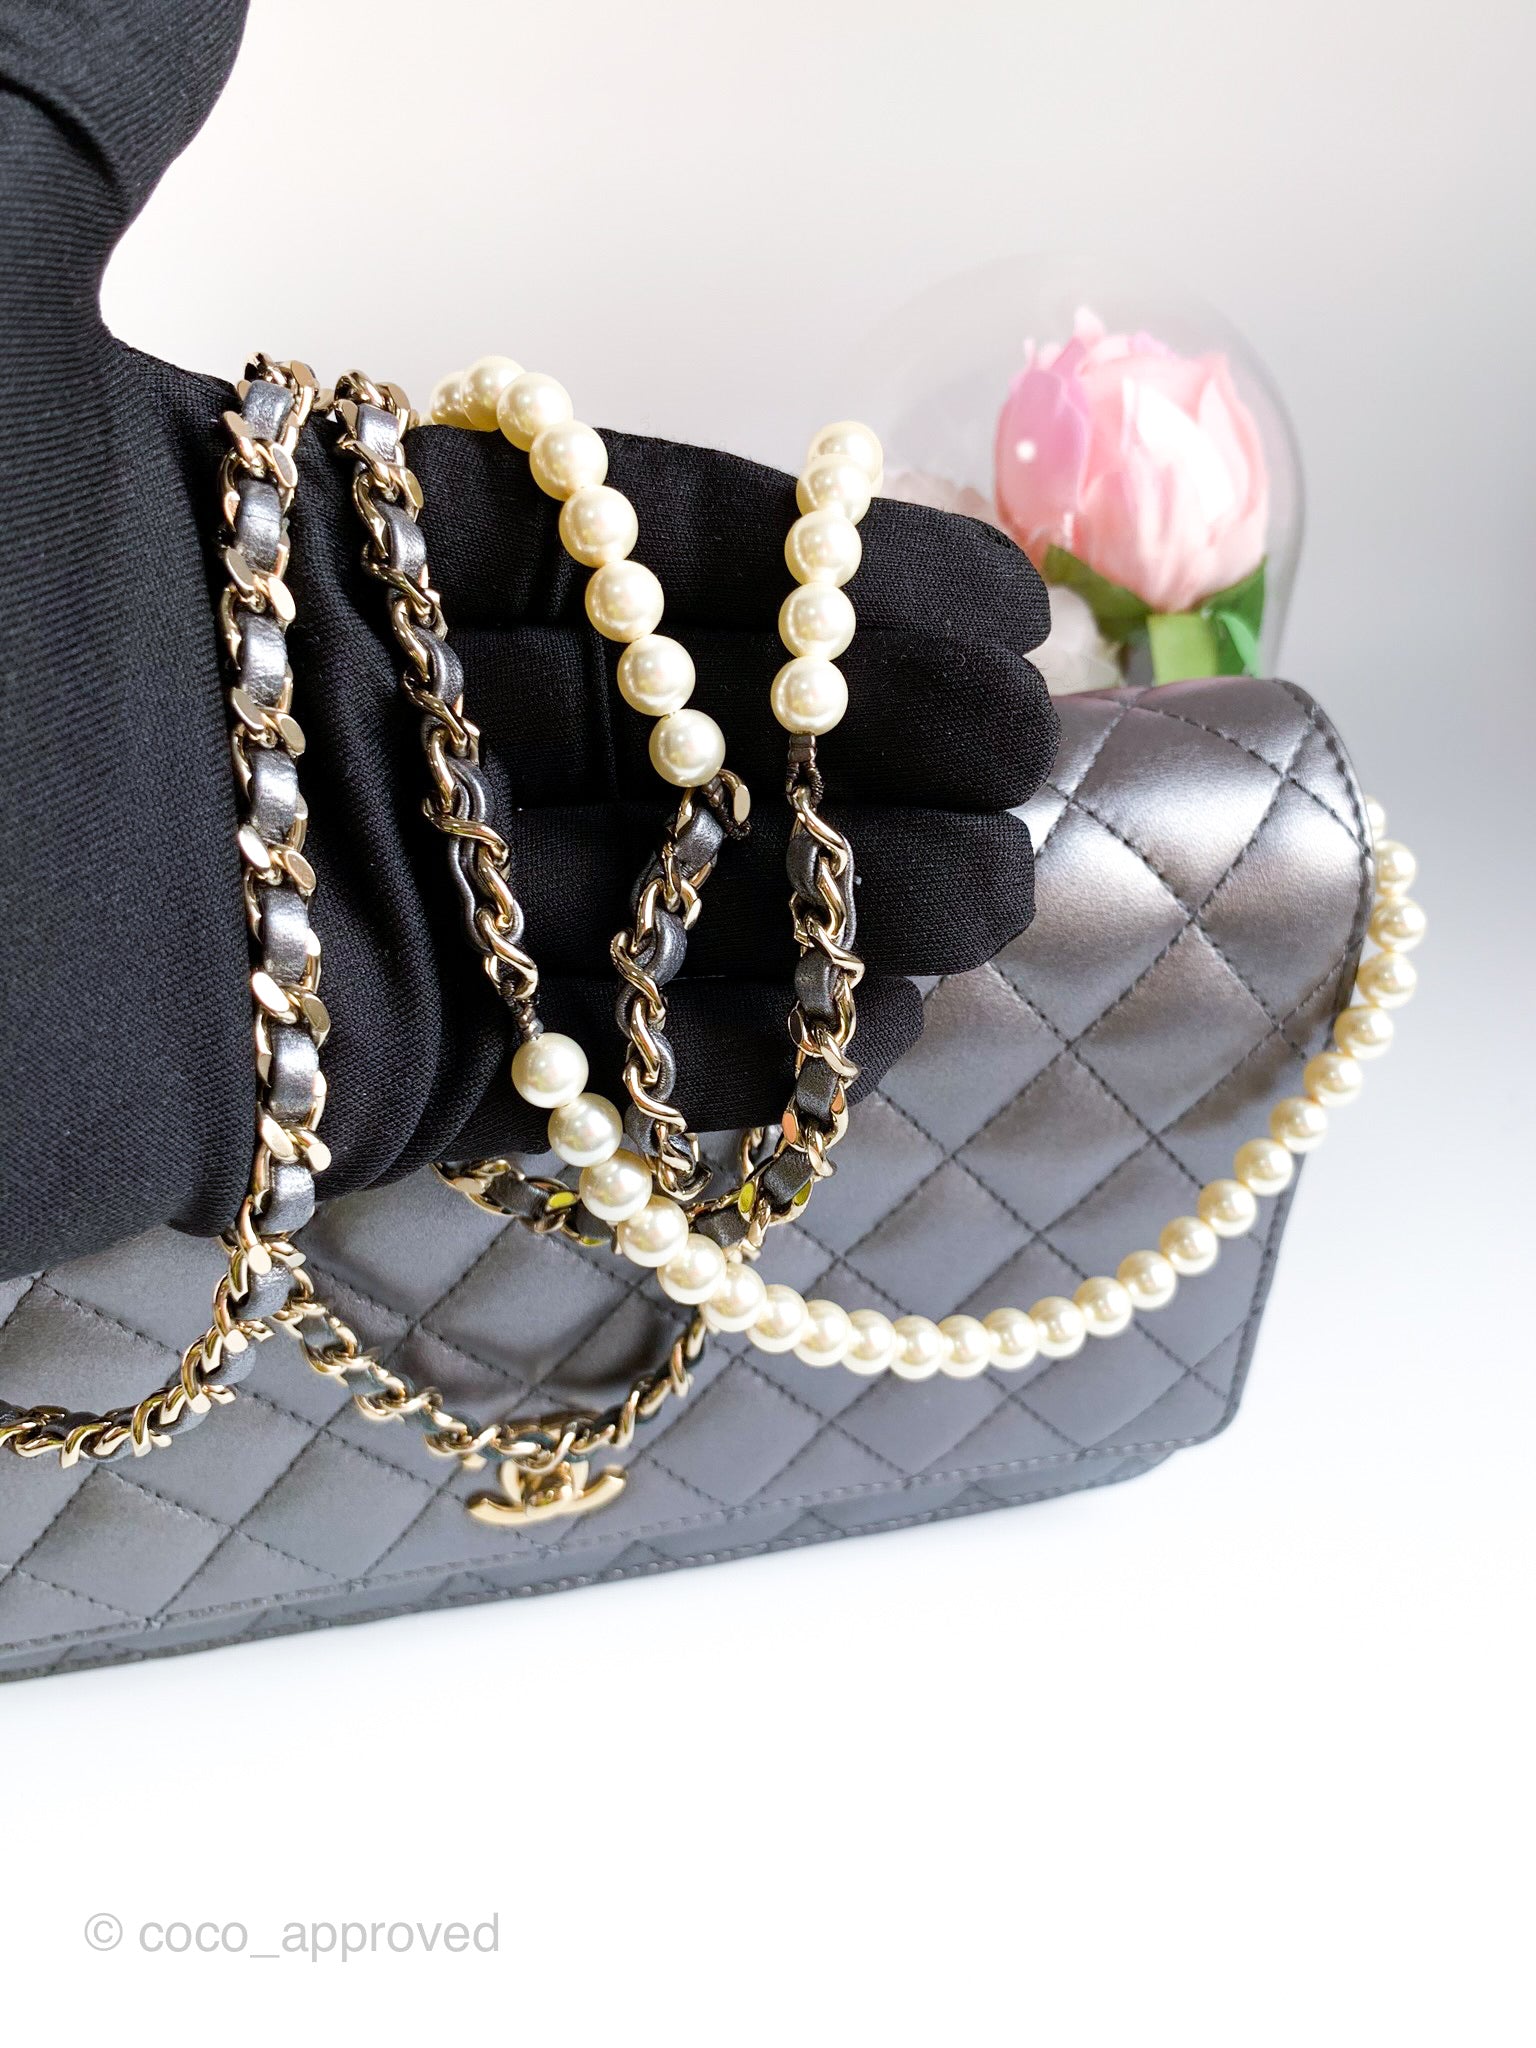 Chanel Fantasy Pearl Flap Bag – Coco Approved Studio